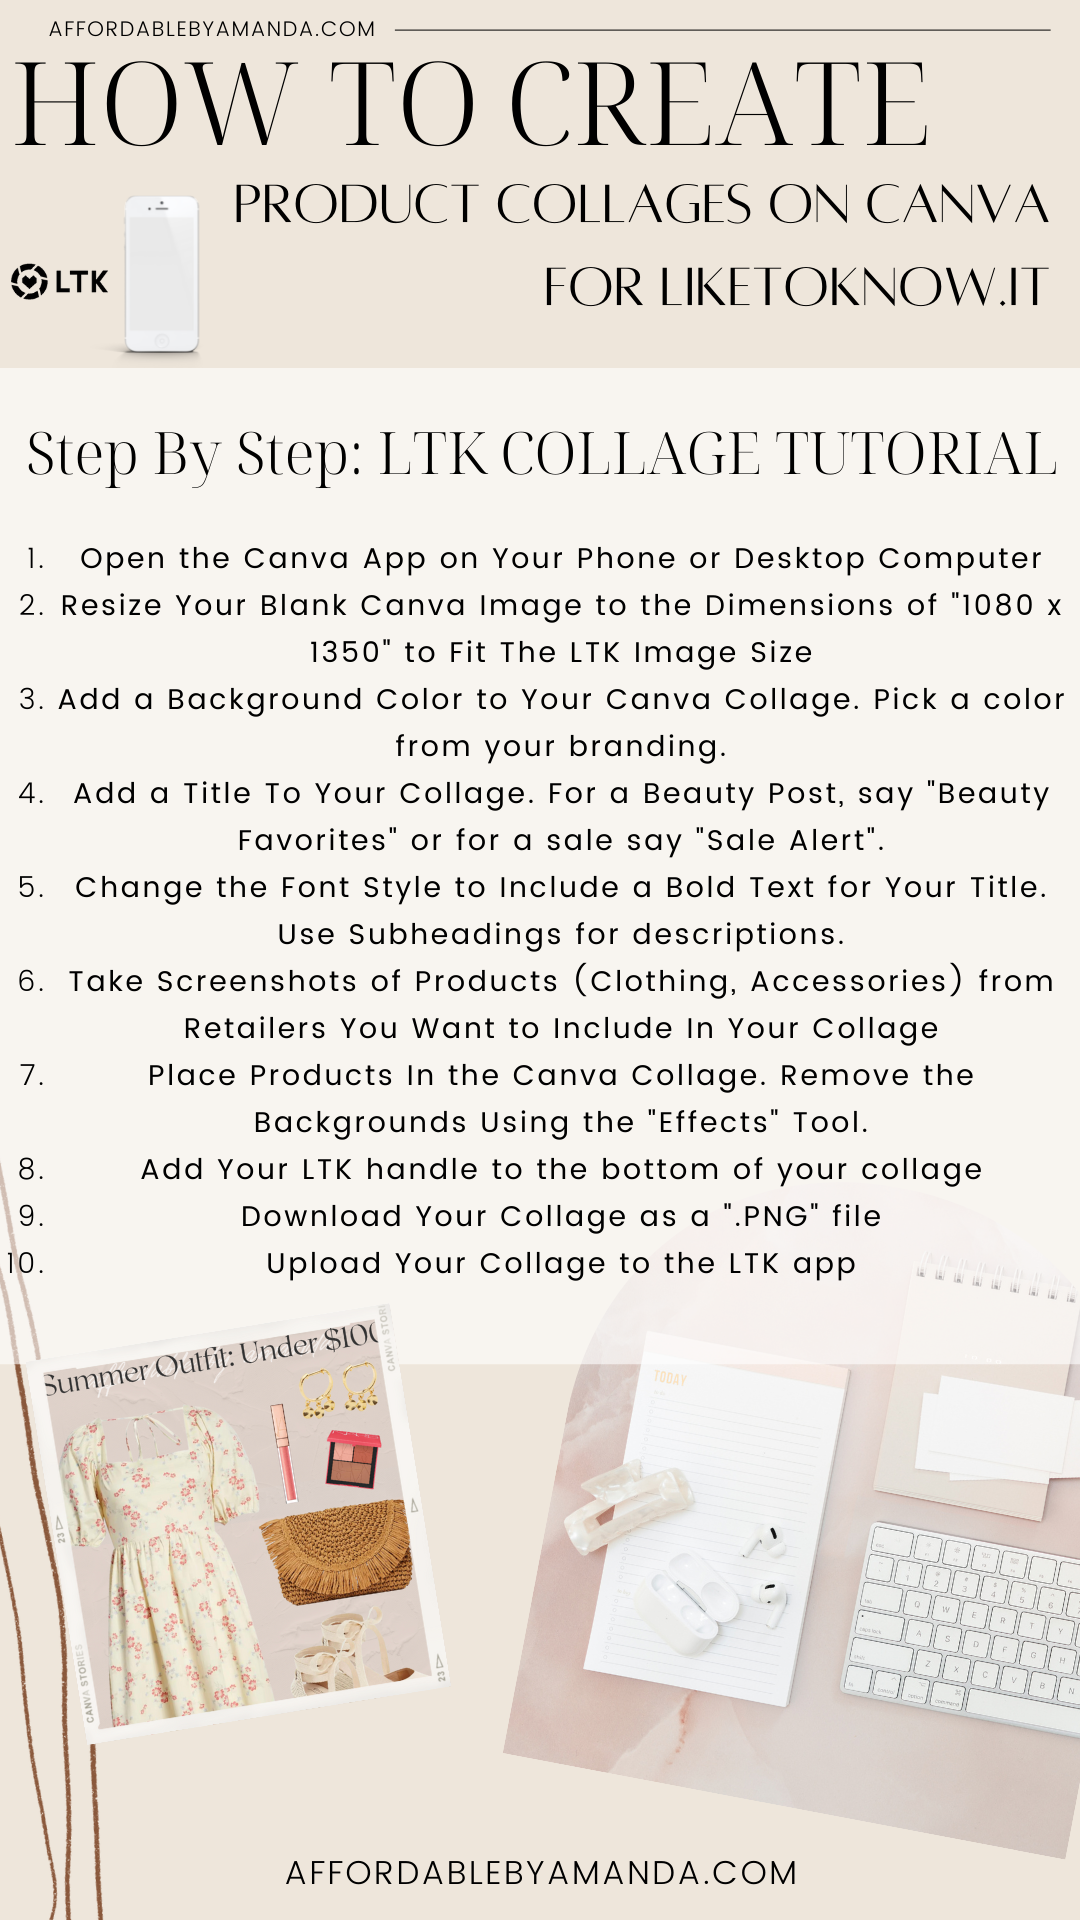 How to Make a Shoppable Collage | How to Make a Product Collage | How to Create Collages for Like To Know It | Affordable by Amanda